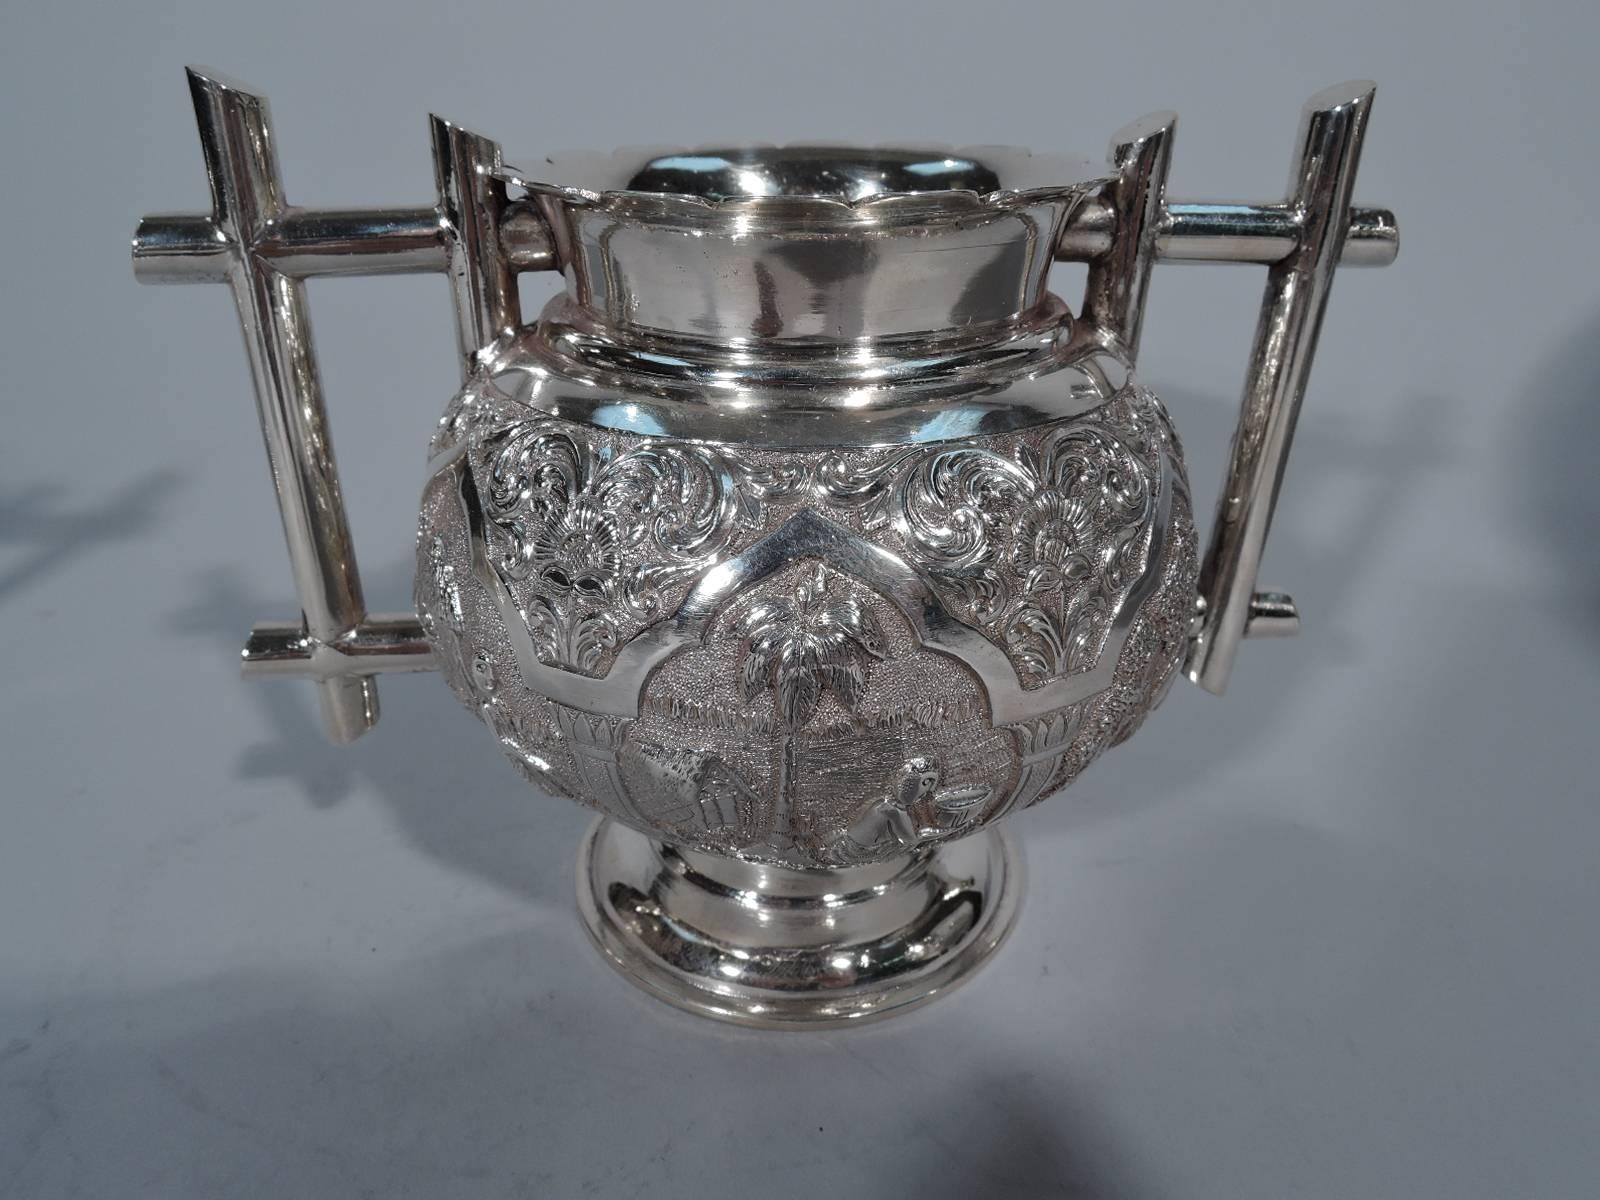 Colonial Indian Silver Tea Set with Exotic Scenes 1